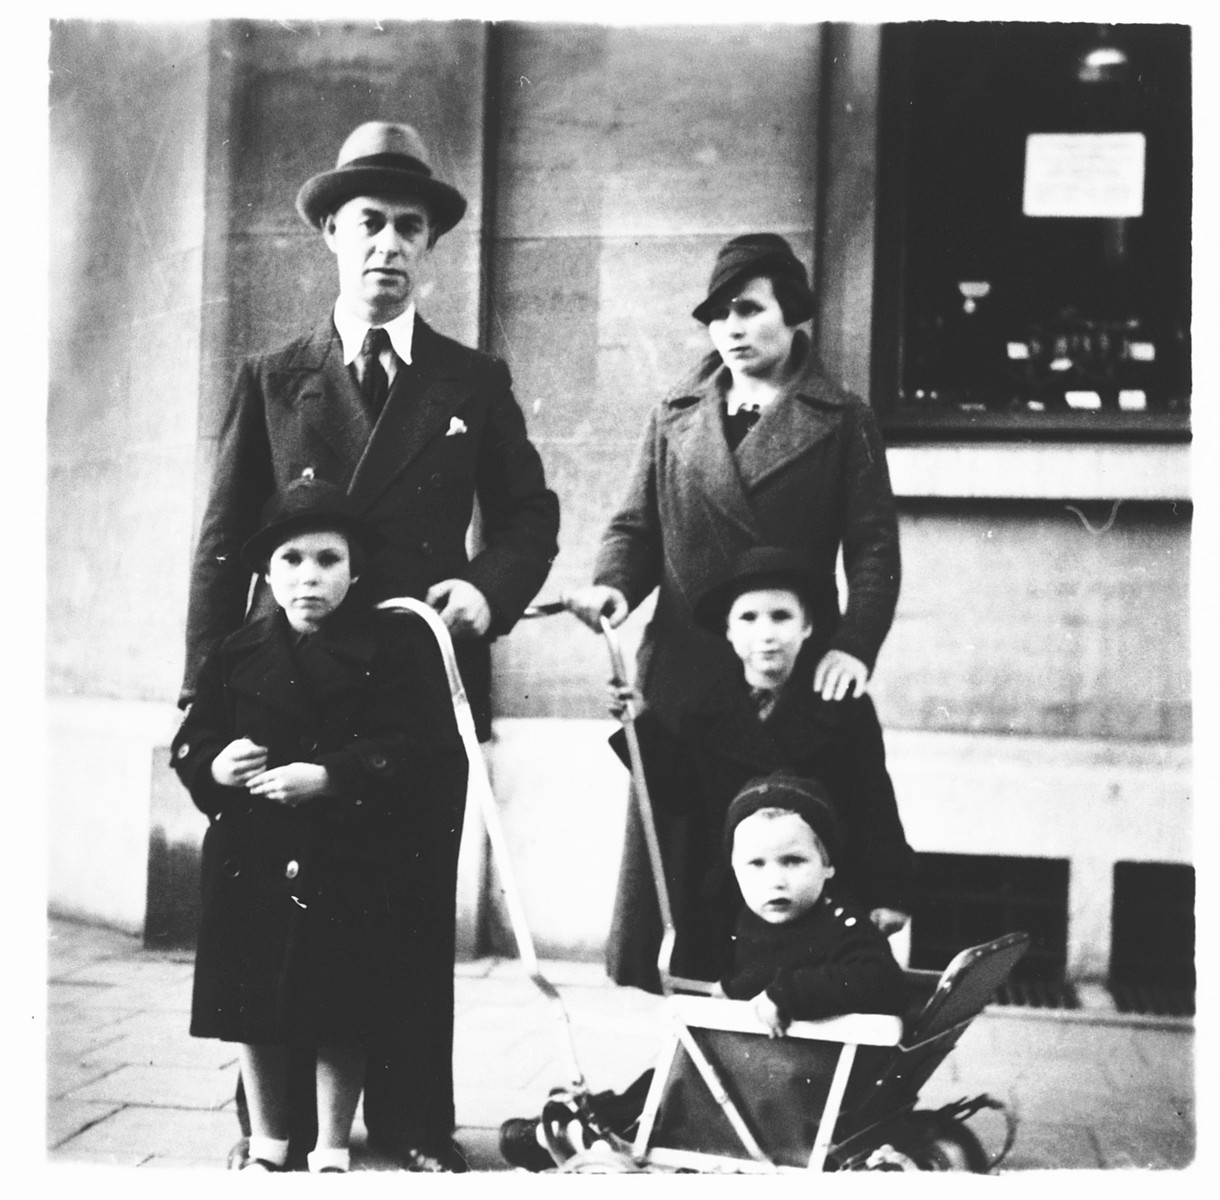 The Altenberg family poses outside a store in Antwerp.